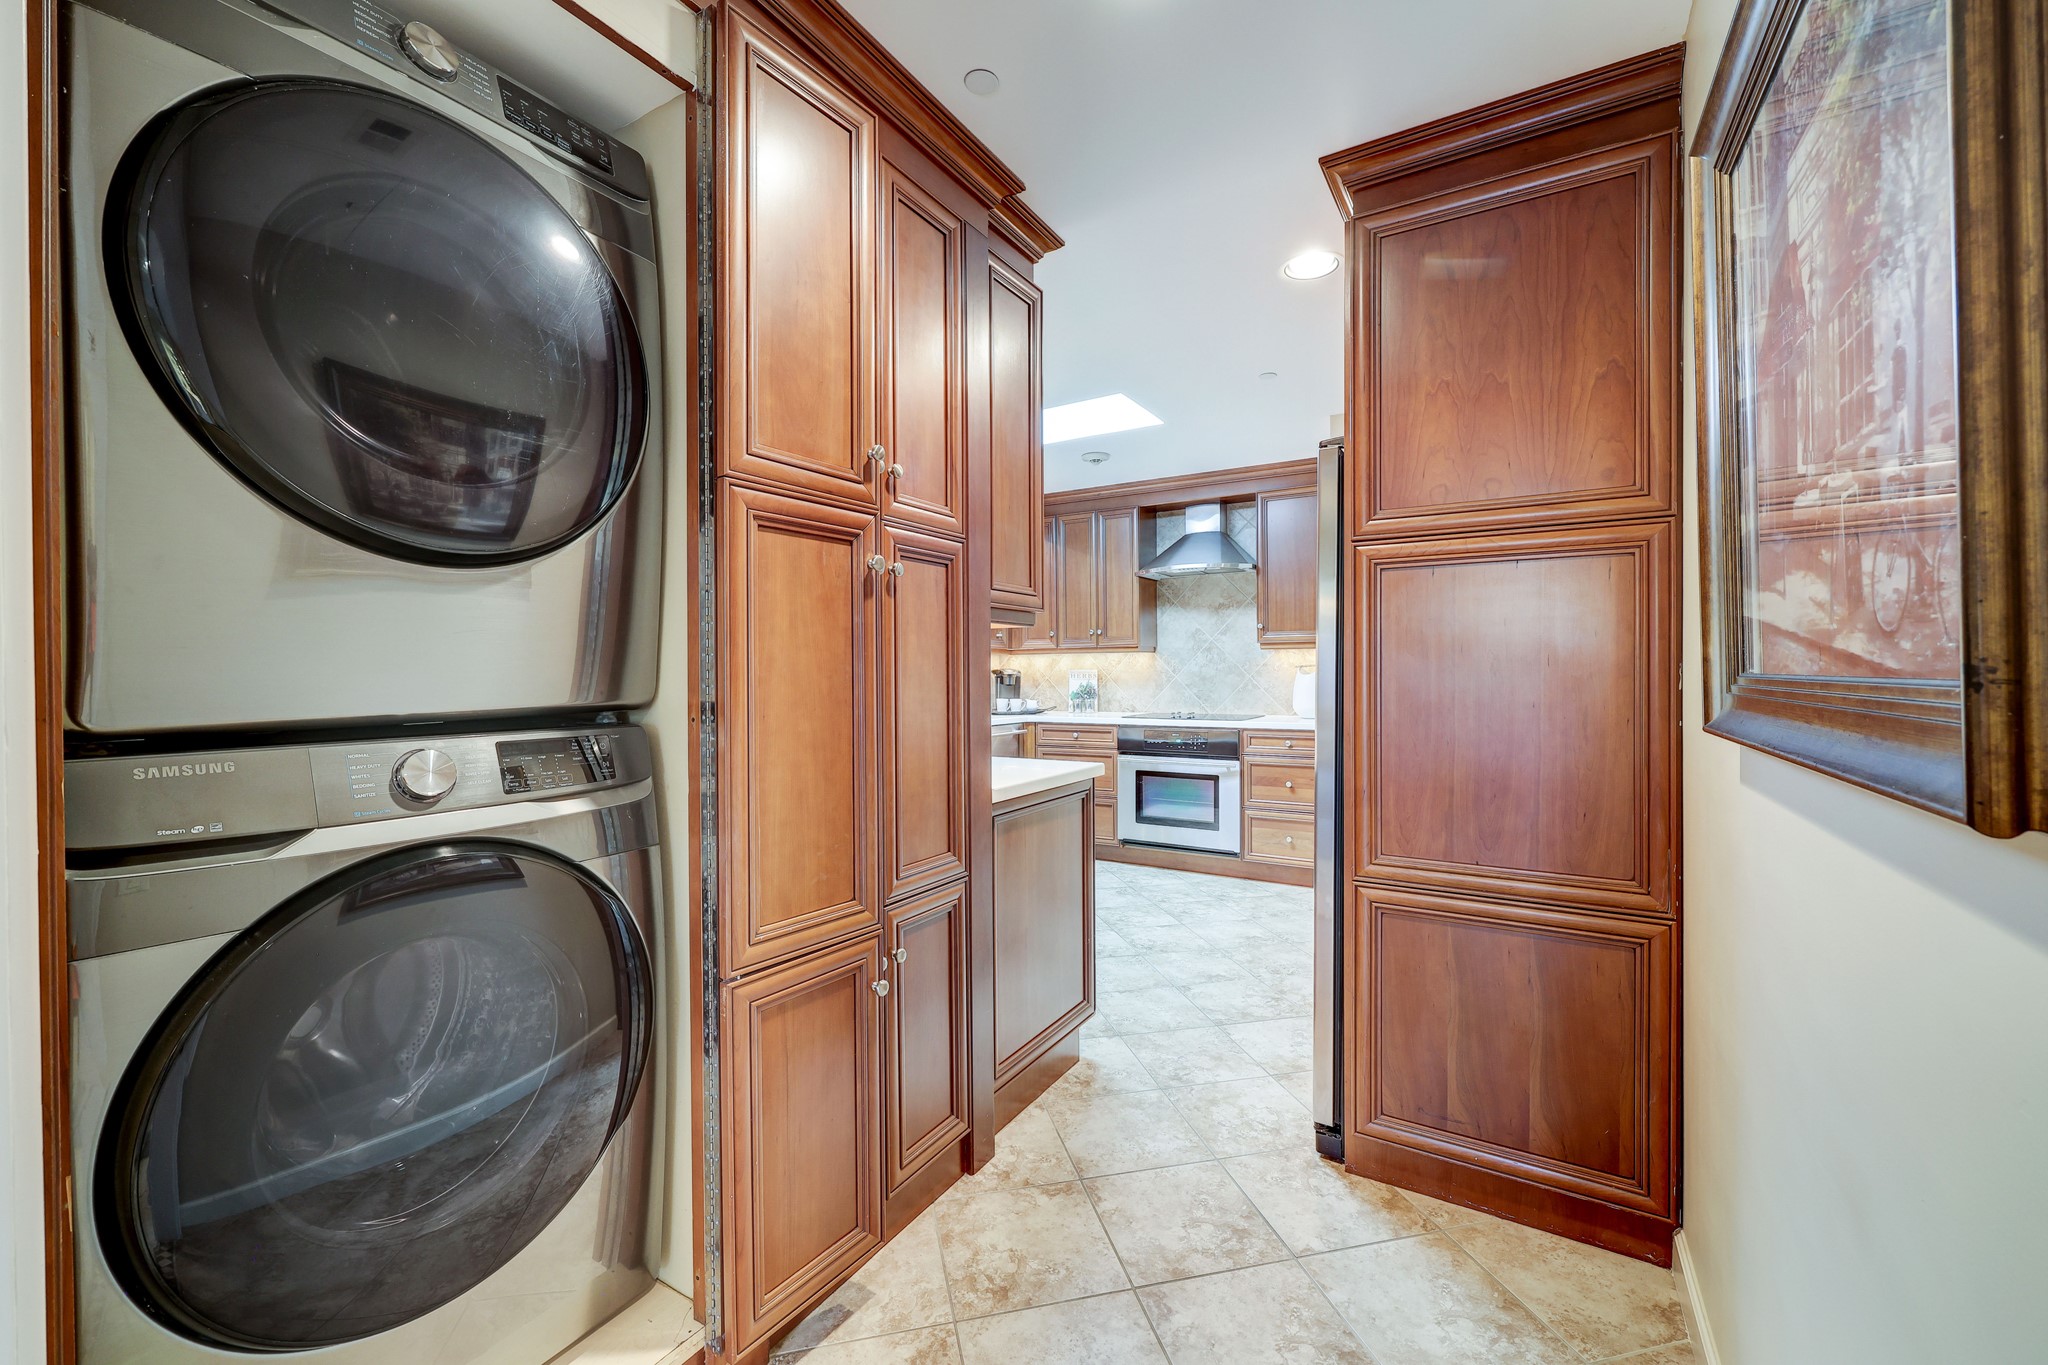 Stackable washer and dryer at entry of kitchen.